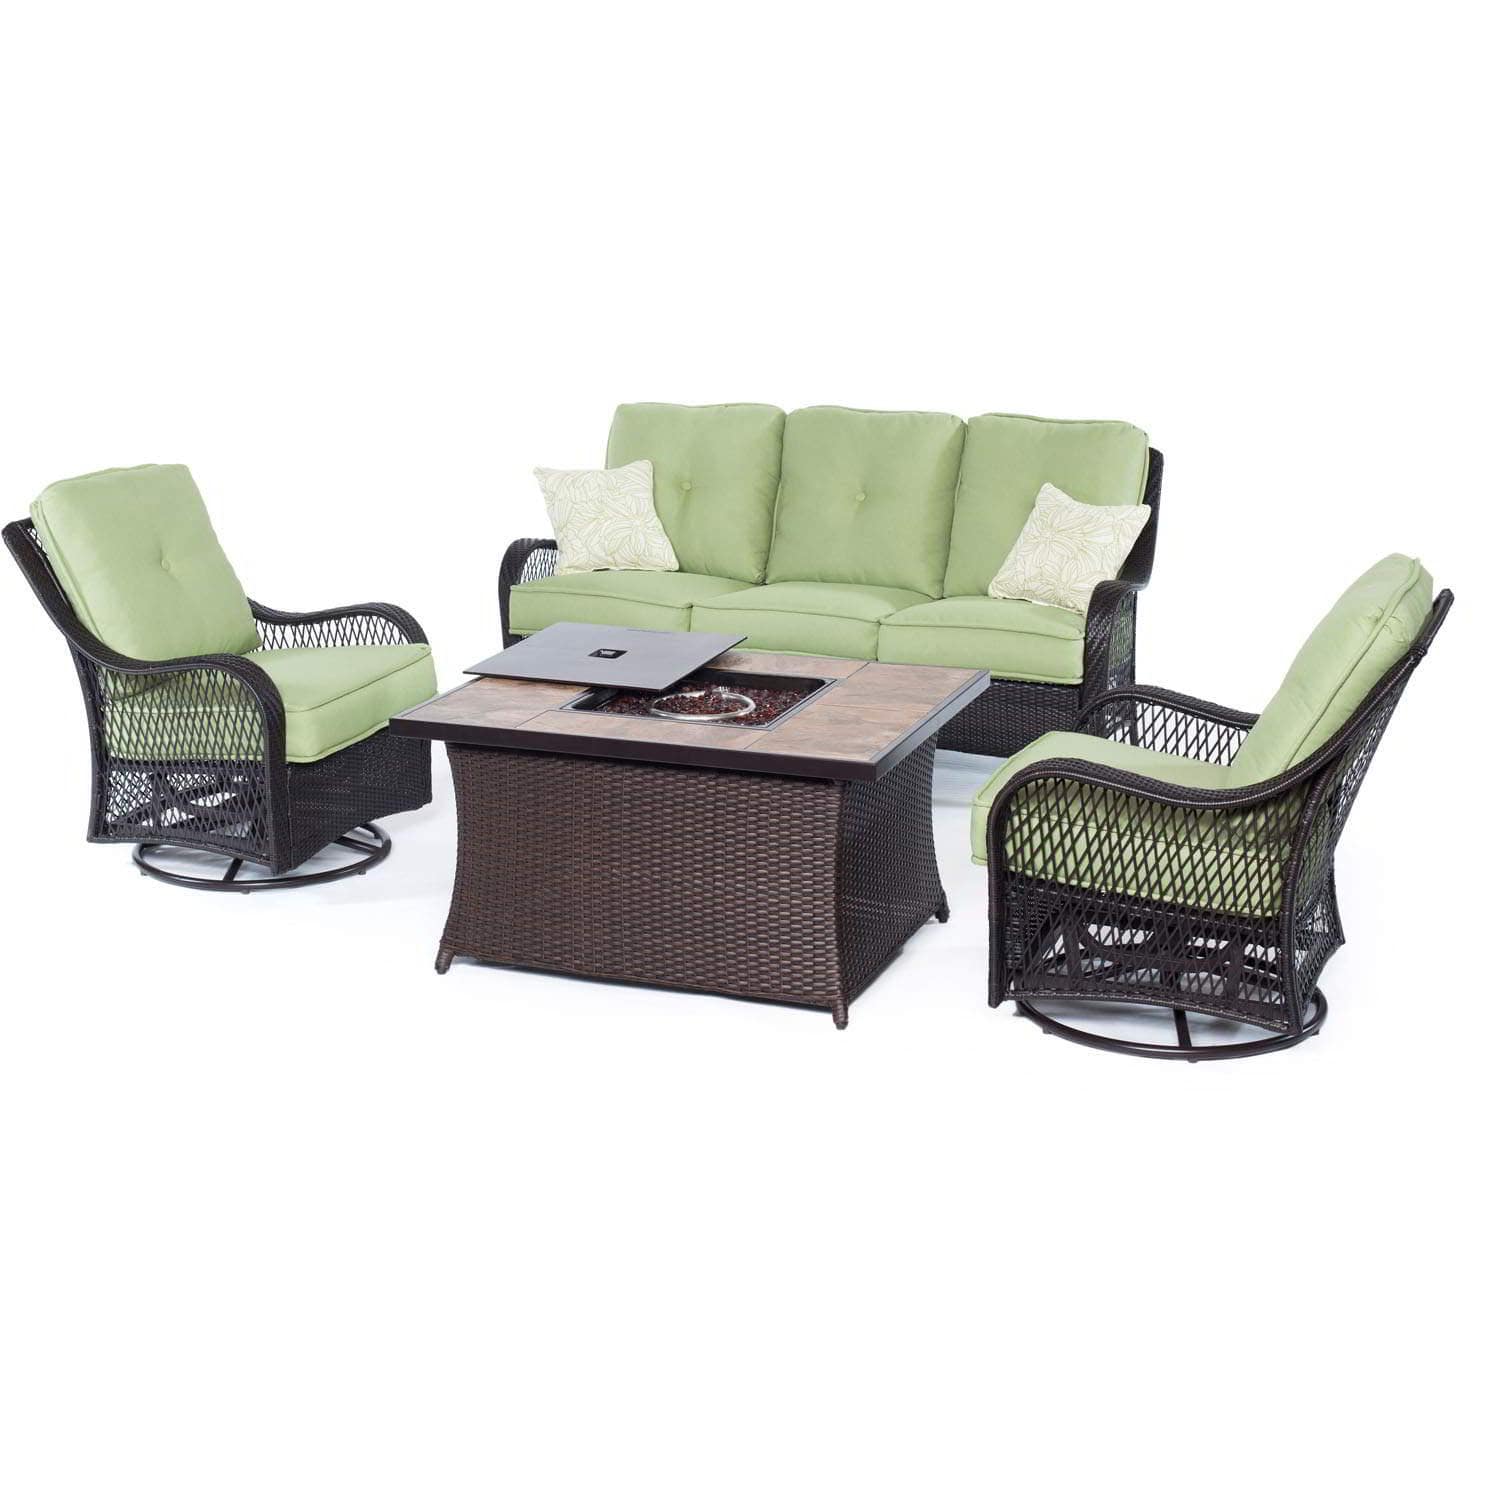 Hanover Fire Pit Chat Set Hanover - Orleans 4-Piece Woven Lounge Set with Fire Pit Table in Avocado Green